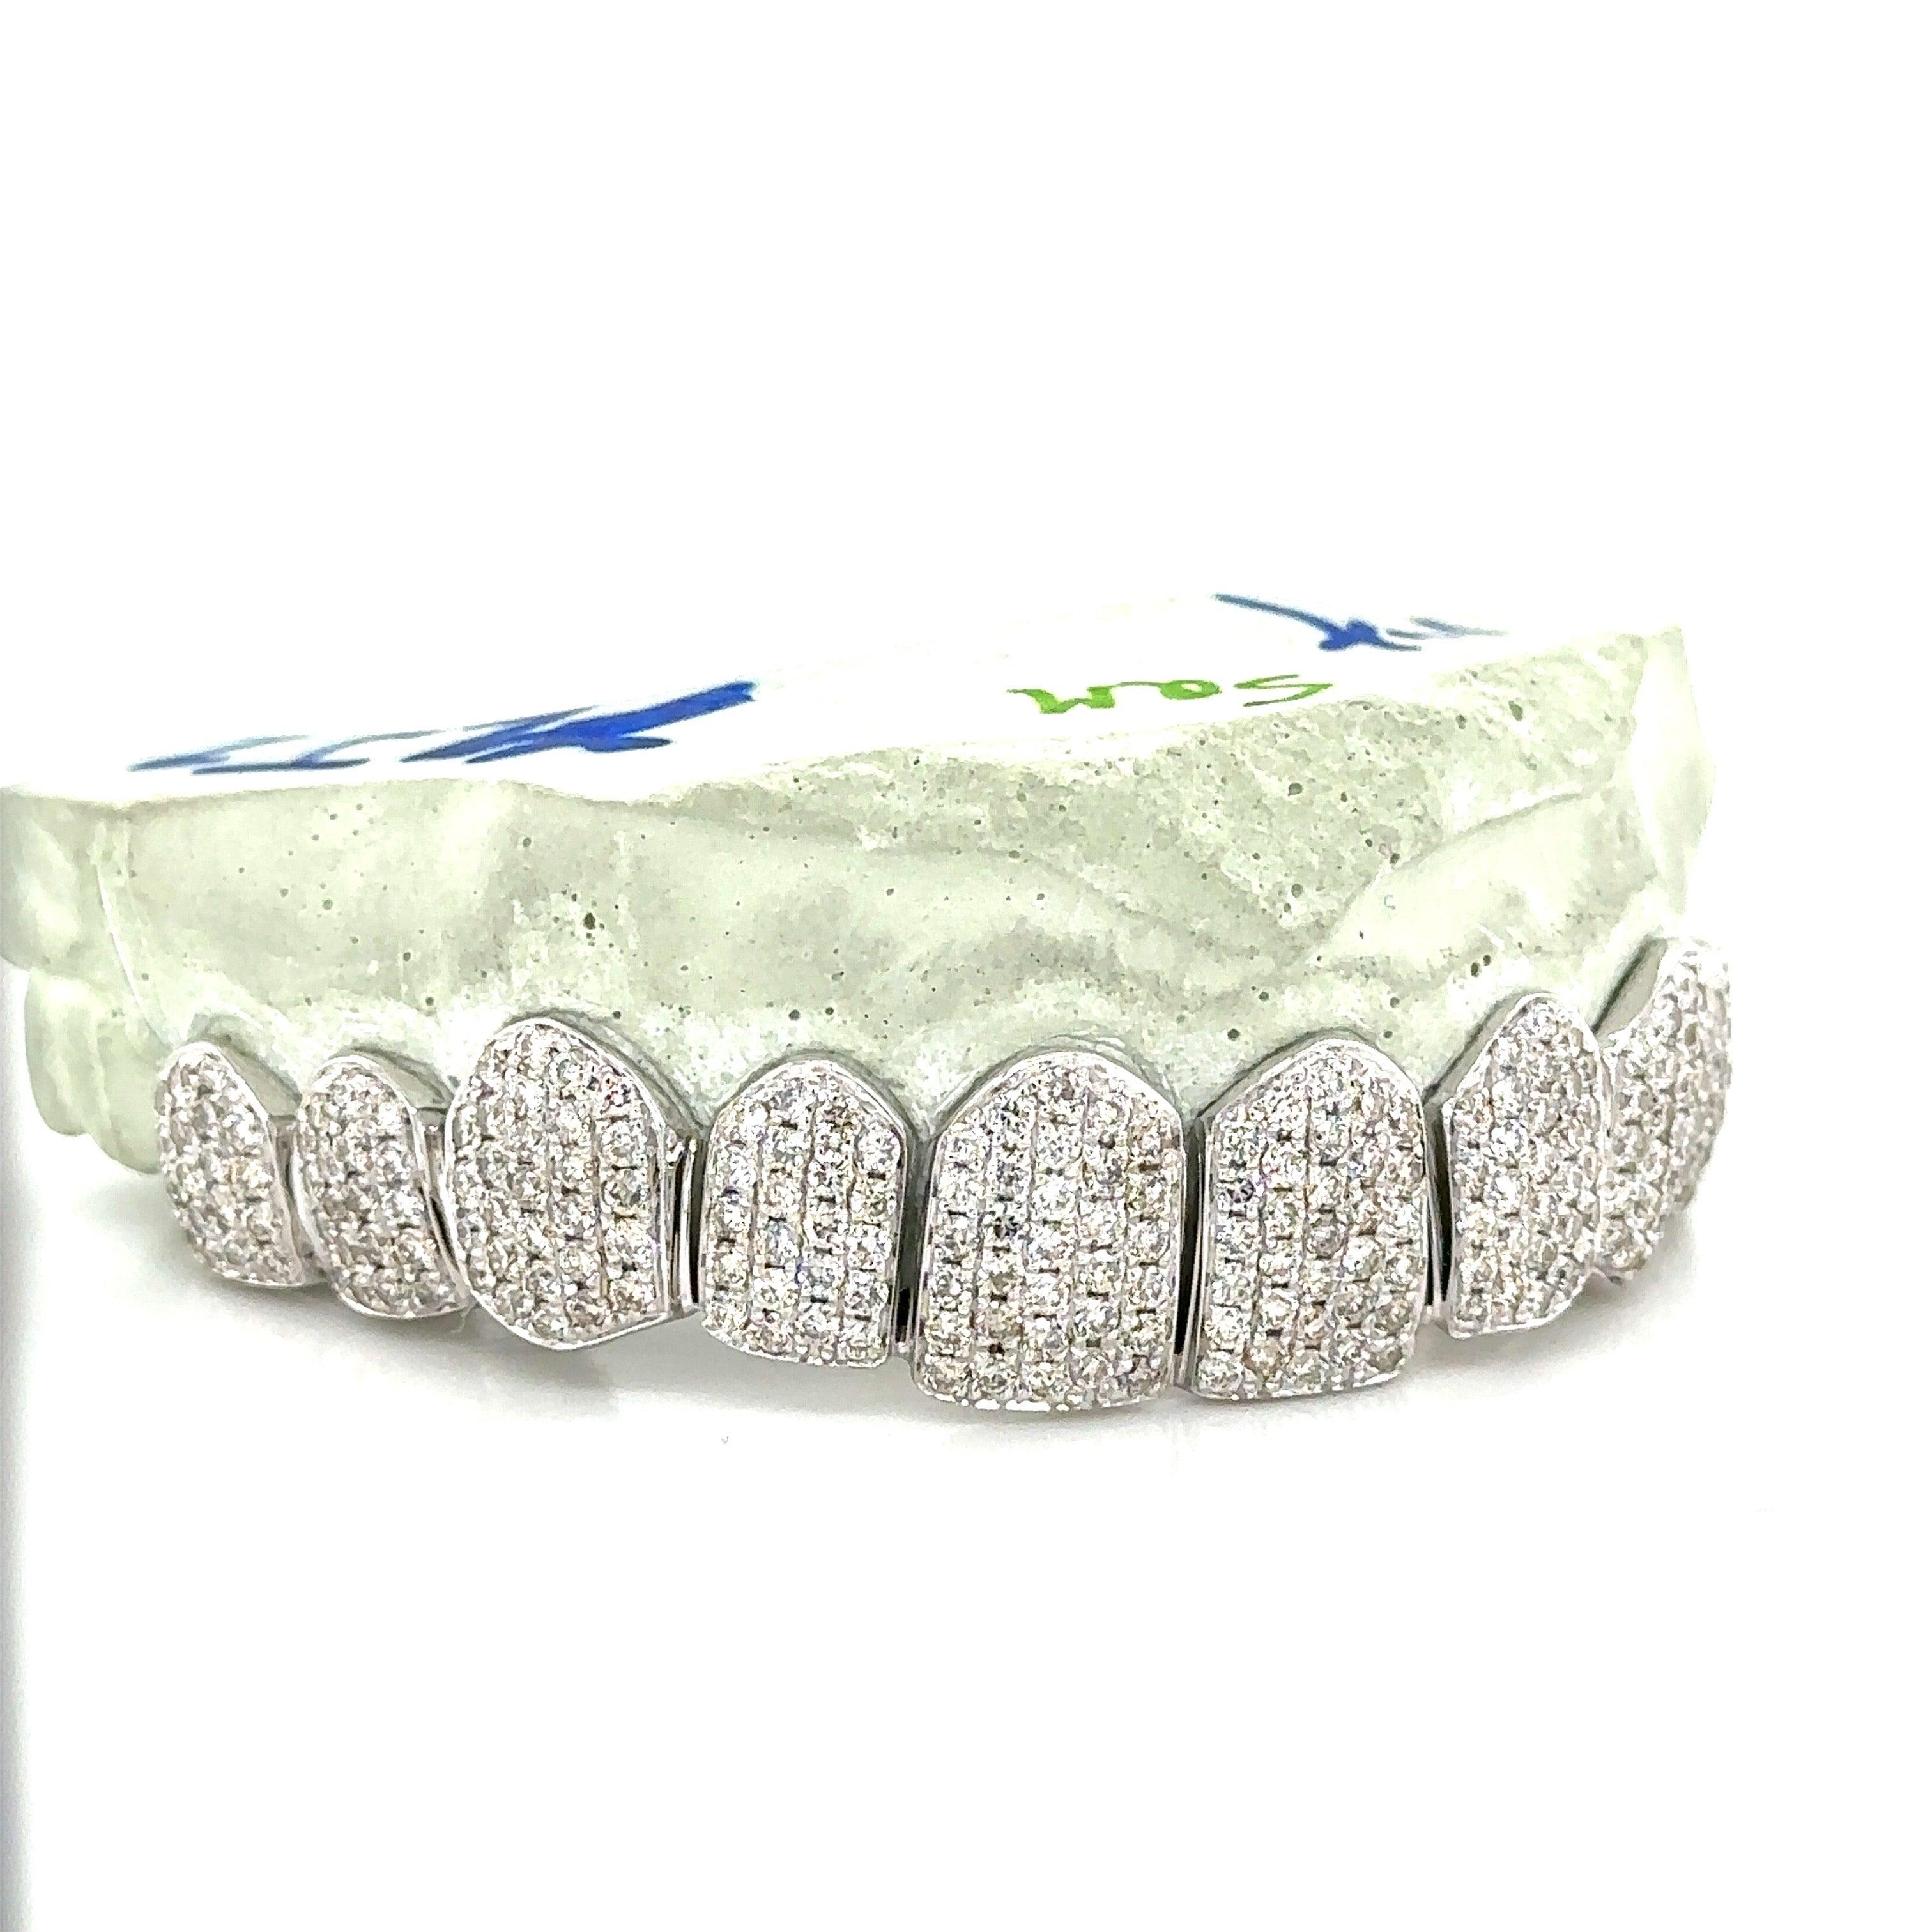 10pc White Gold Honeycomb Top Grillz - Seattle Gold Grillz